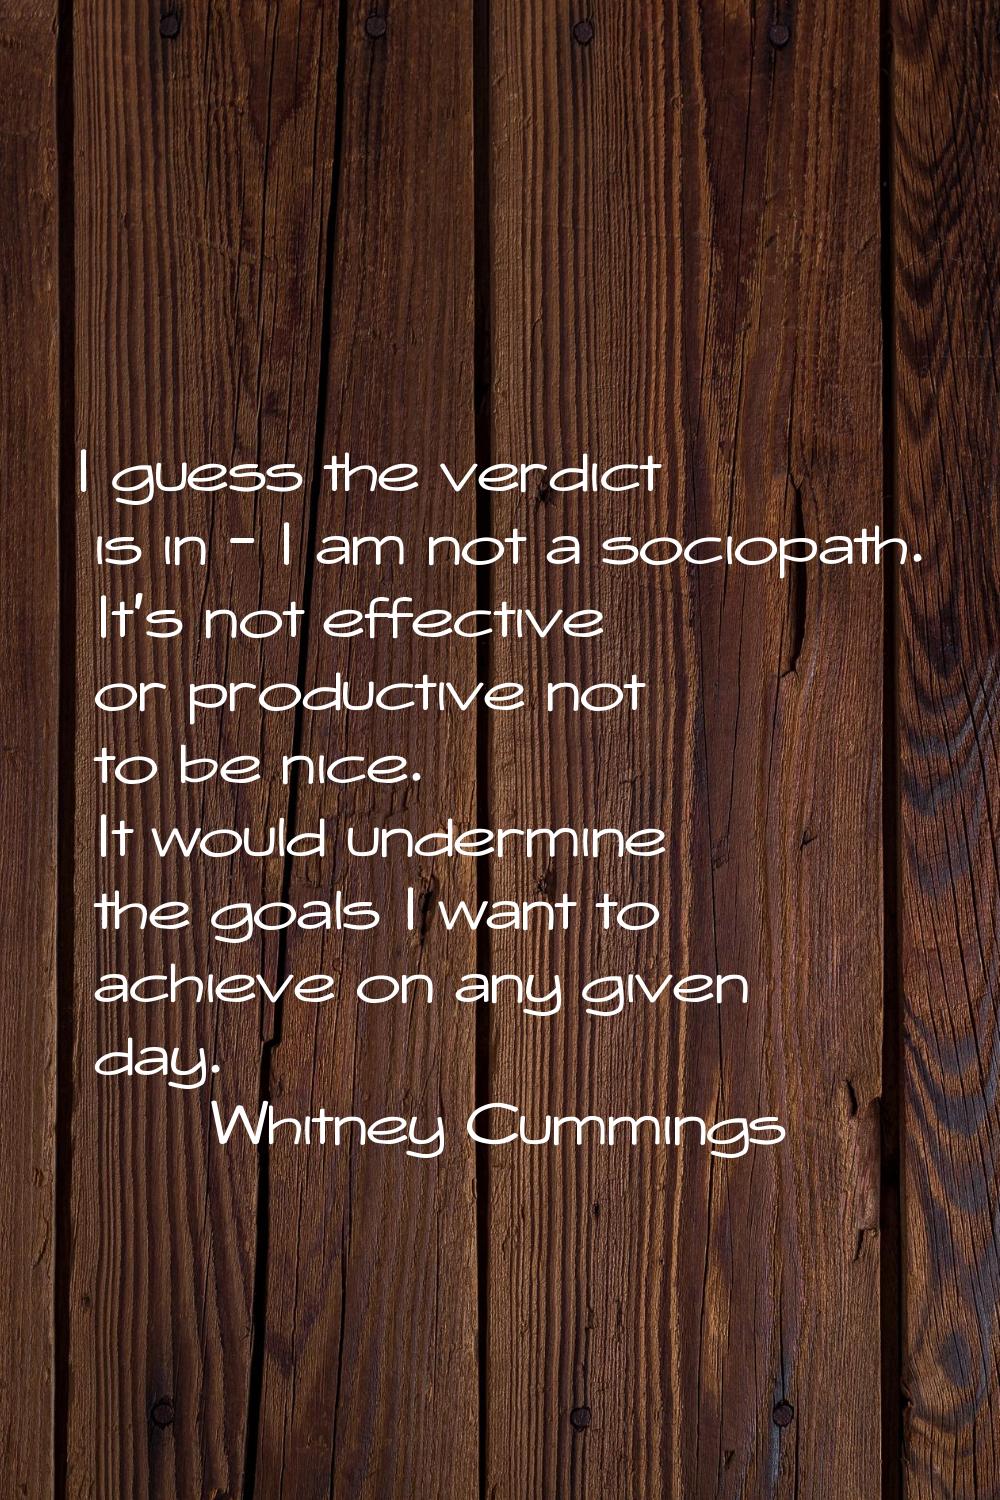 I guess the verdict is in - I am not a sociopath. It's not effective or productive not to be nice. 